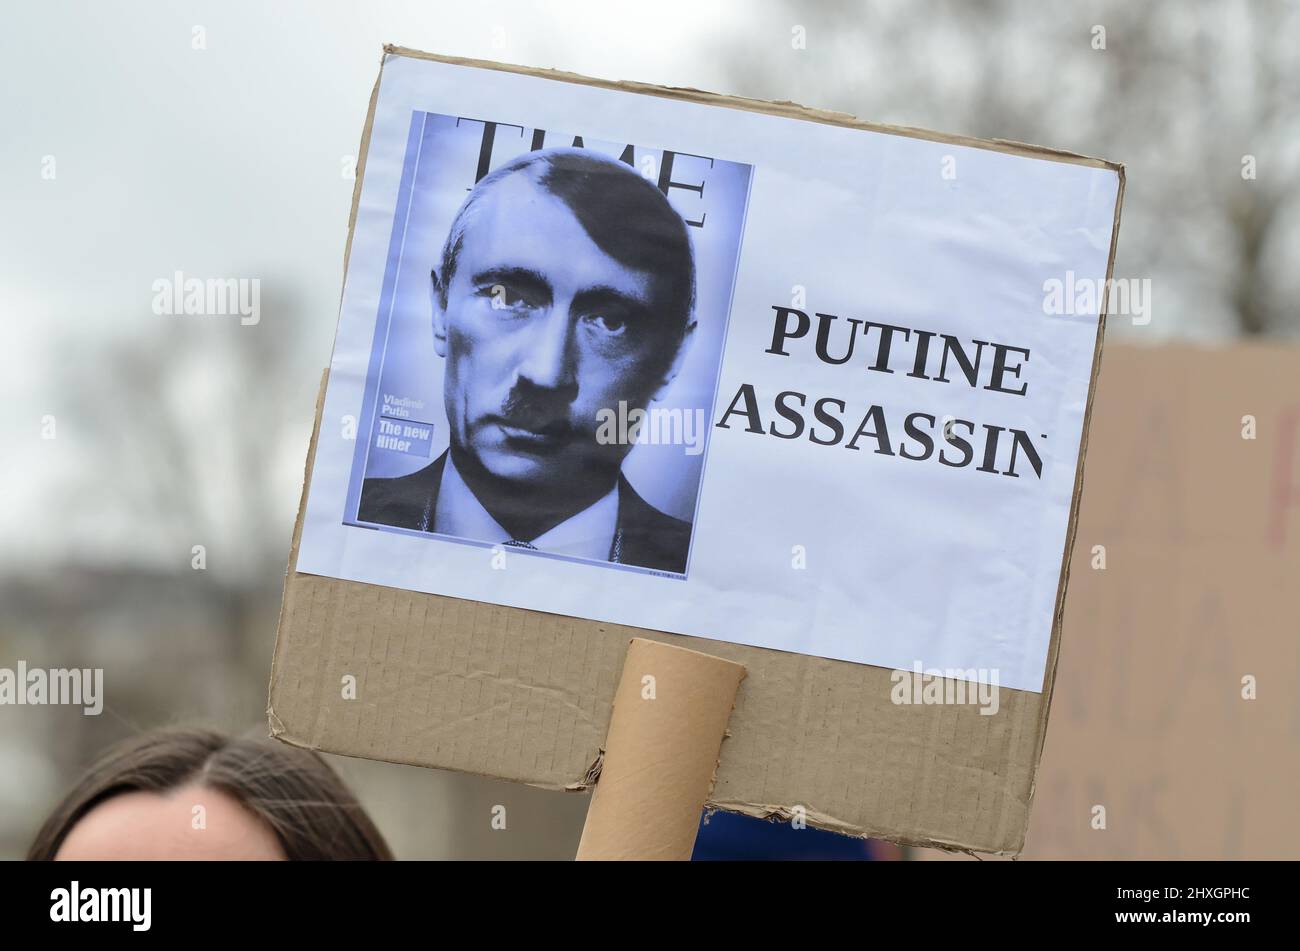 A new rally against Putin's war policy and in support of the Ukrainian people took place on the Place de la Republique, to demand an end to the war. Stock Photo